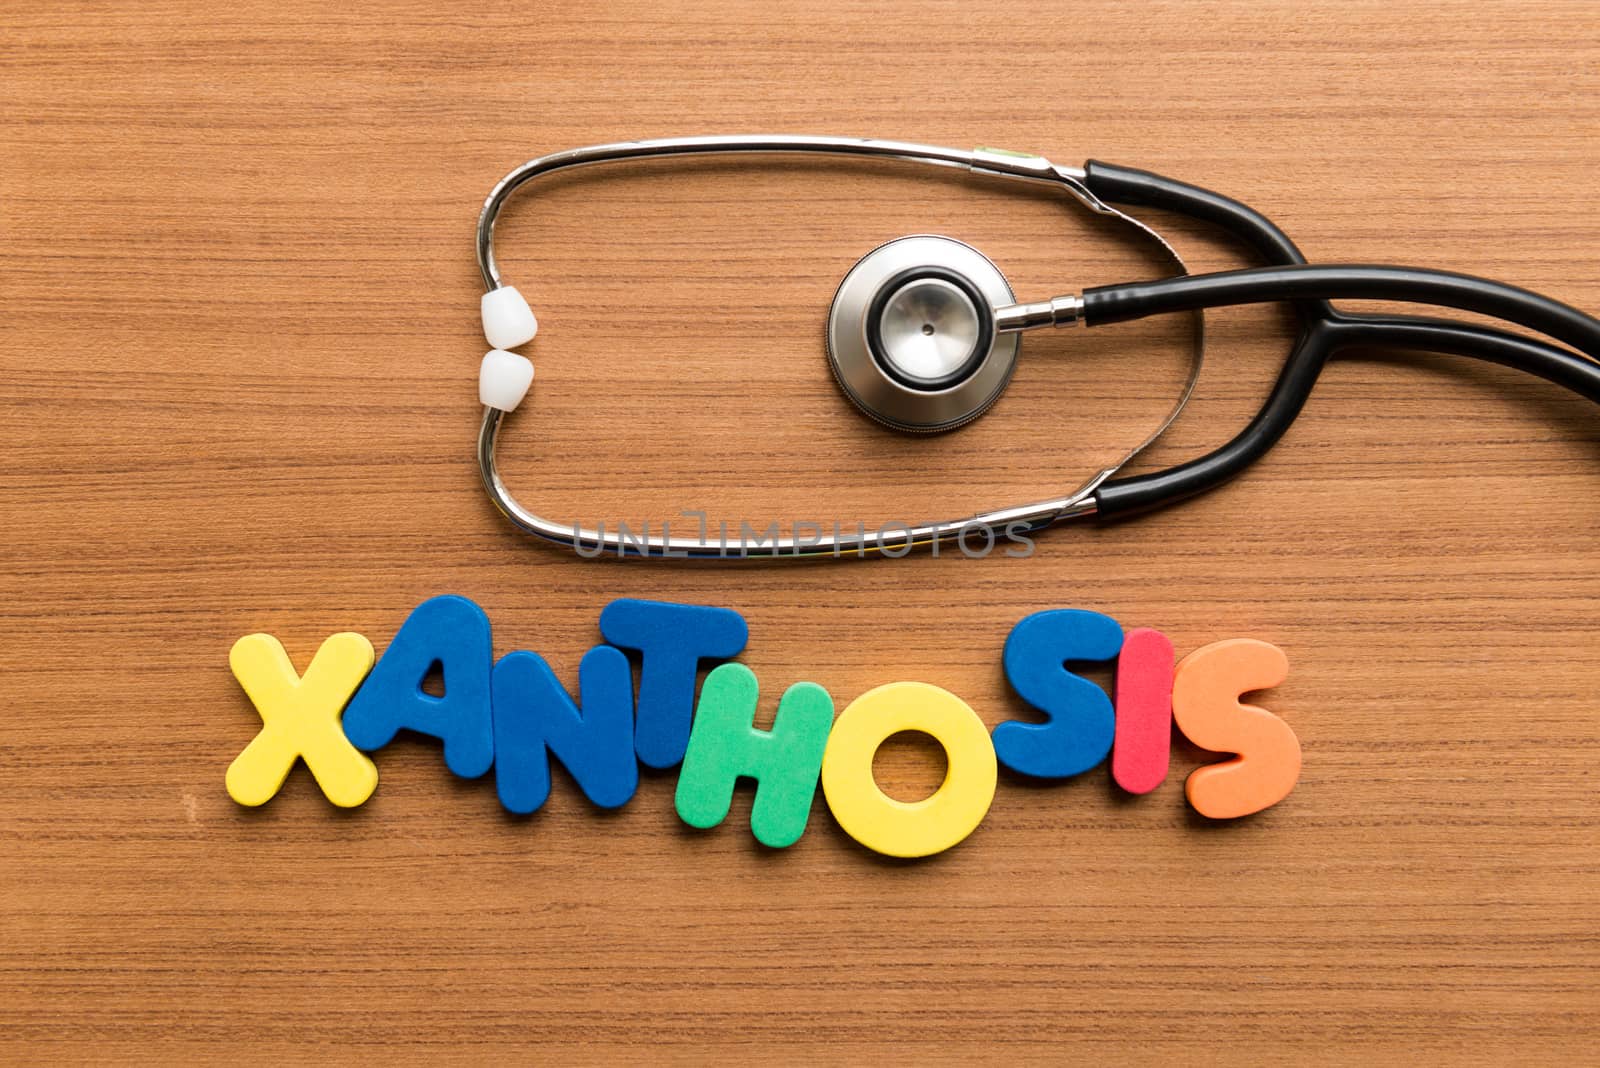 xanthosis colorful word with stethoscope on wooden background